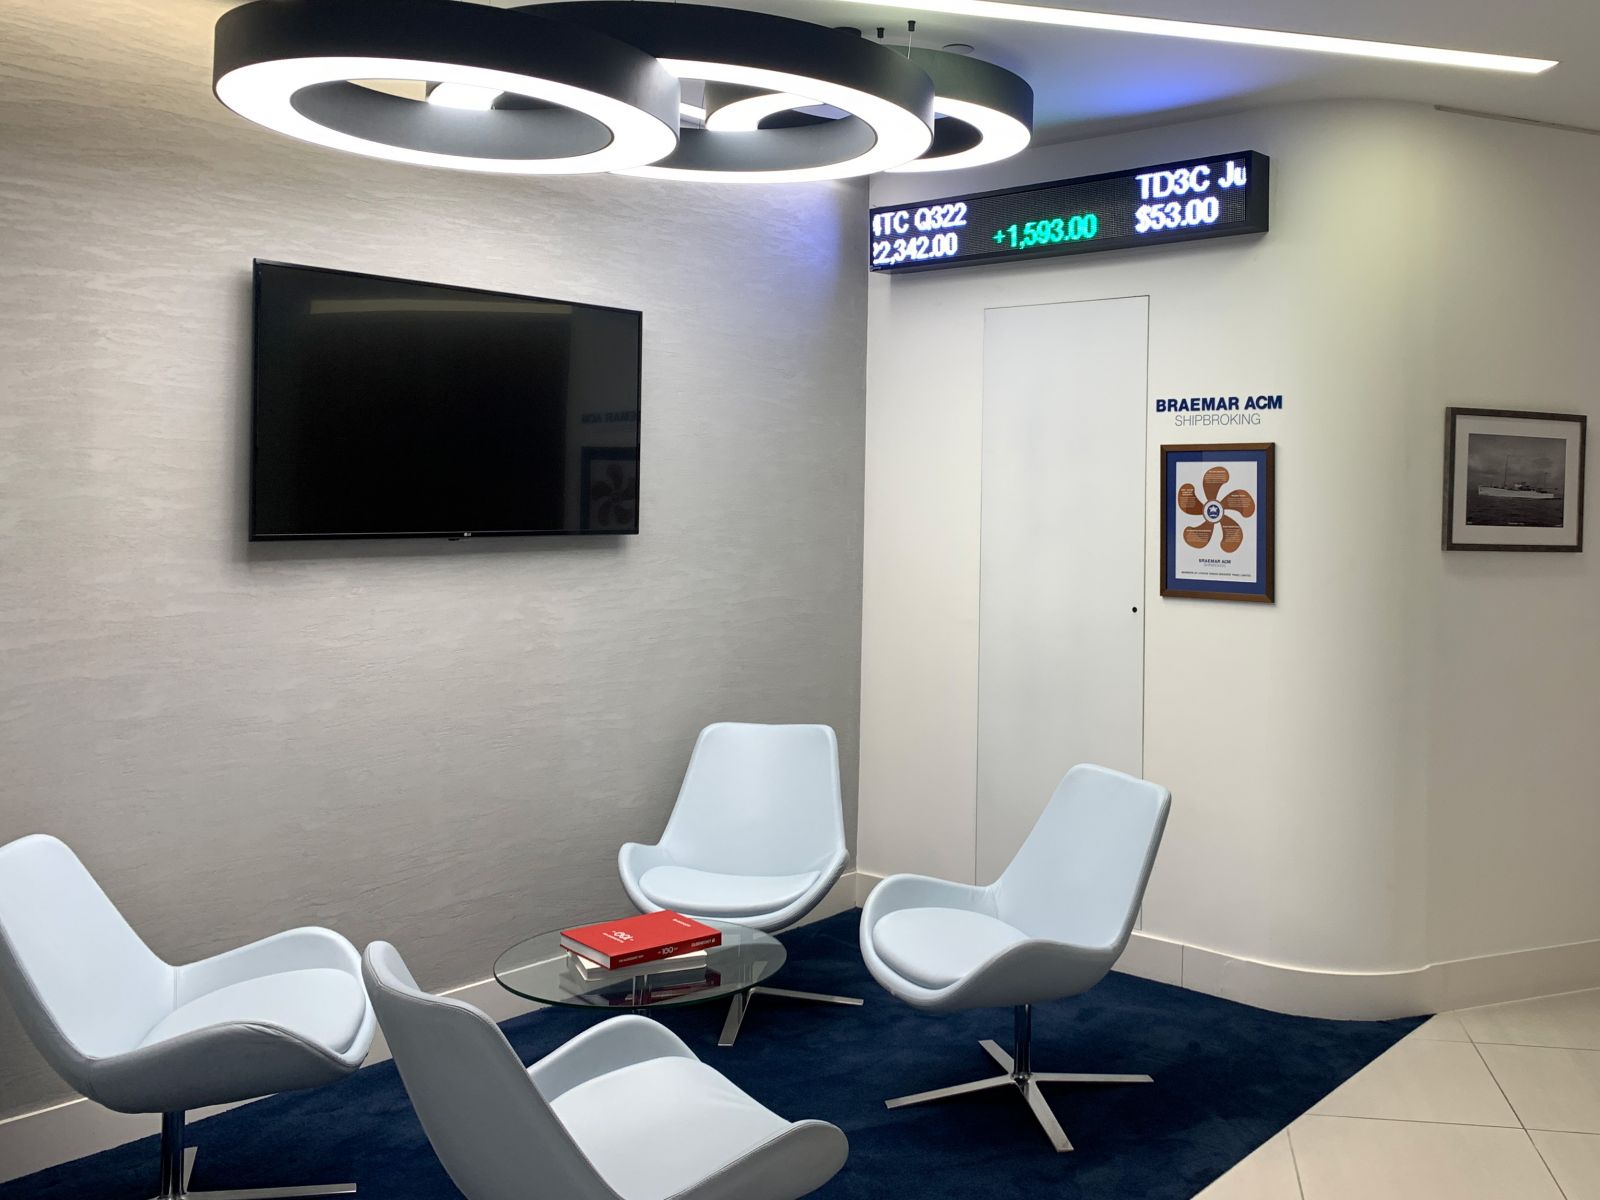 LED Financial Tickers Installation